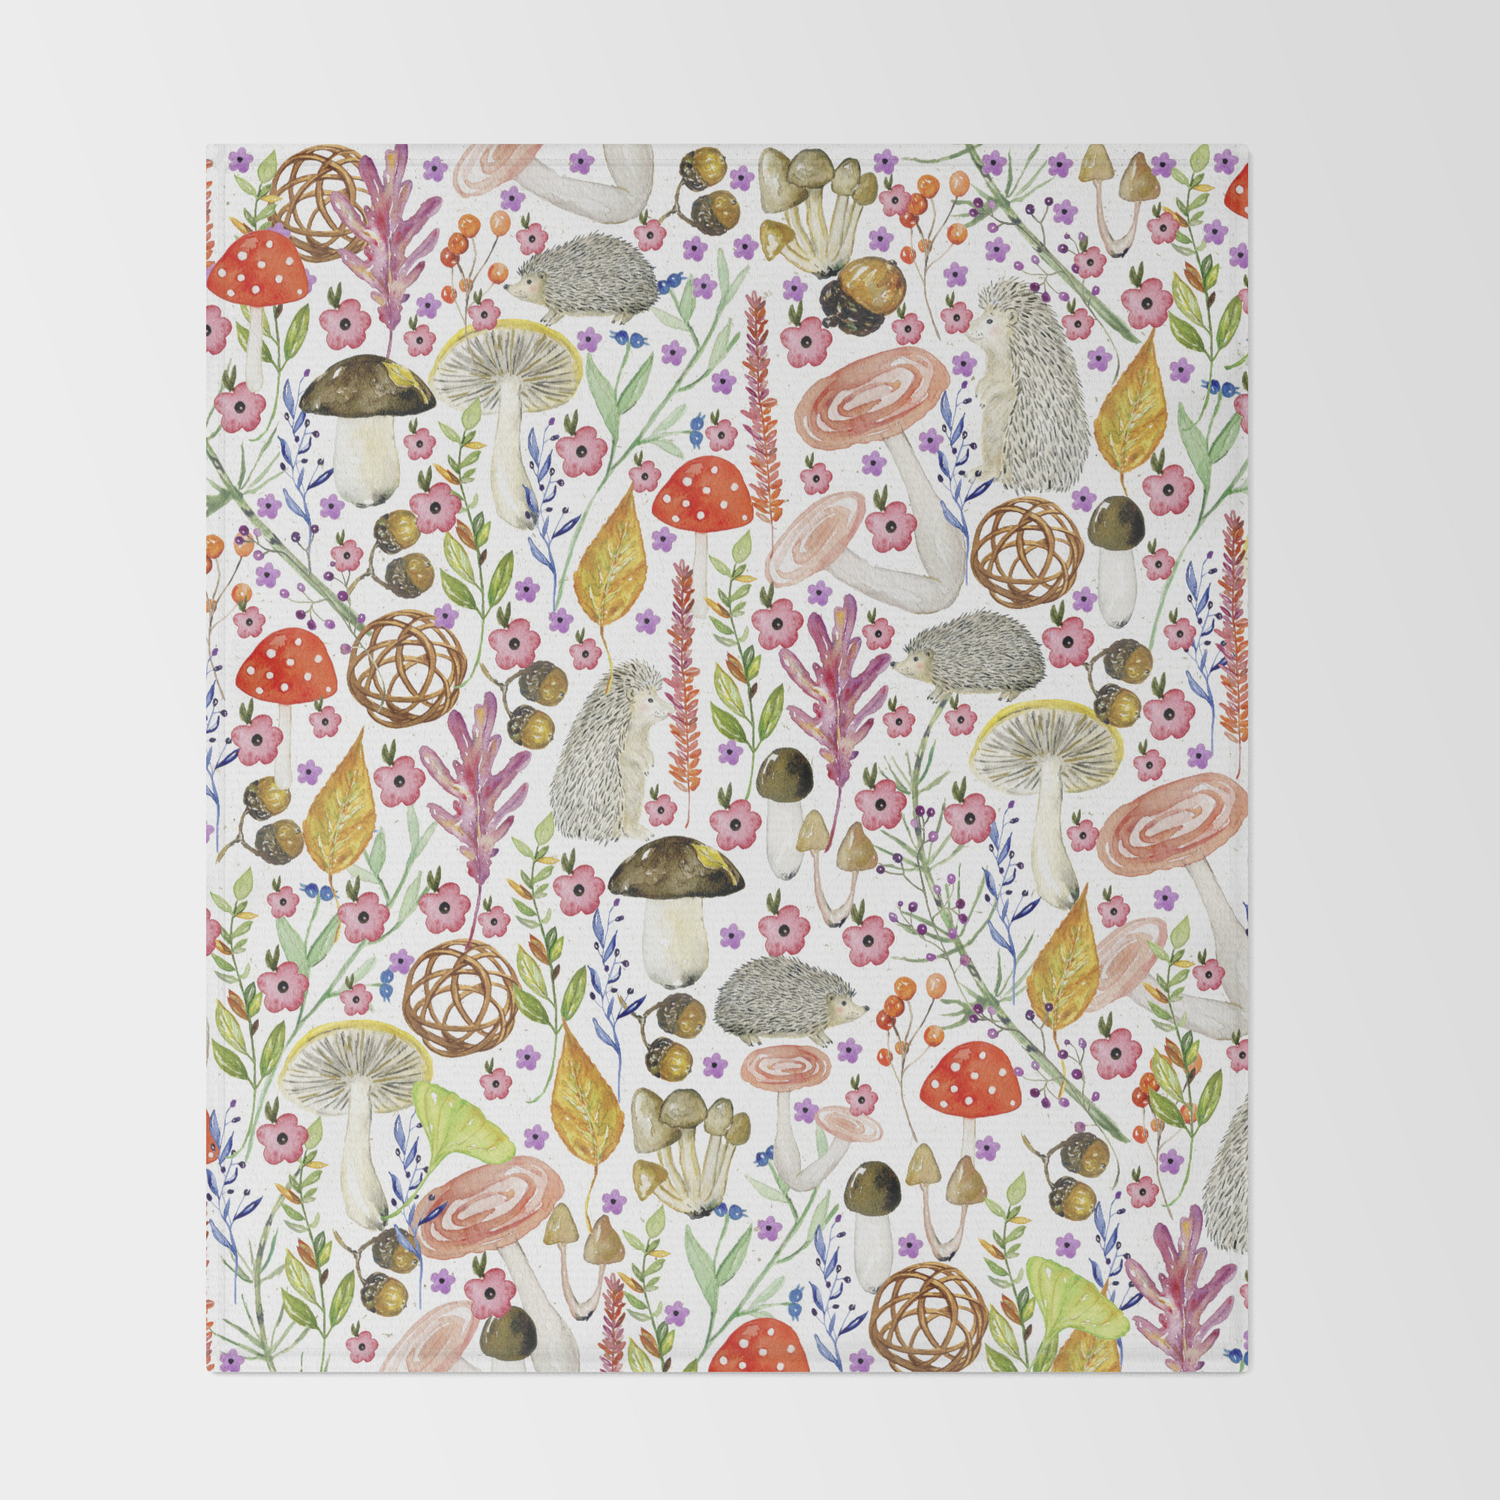 Society6 Colorful Autumn Woodland Animals and Foliage Pattern by Artonwear on Throw Pillow 